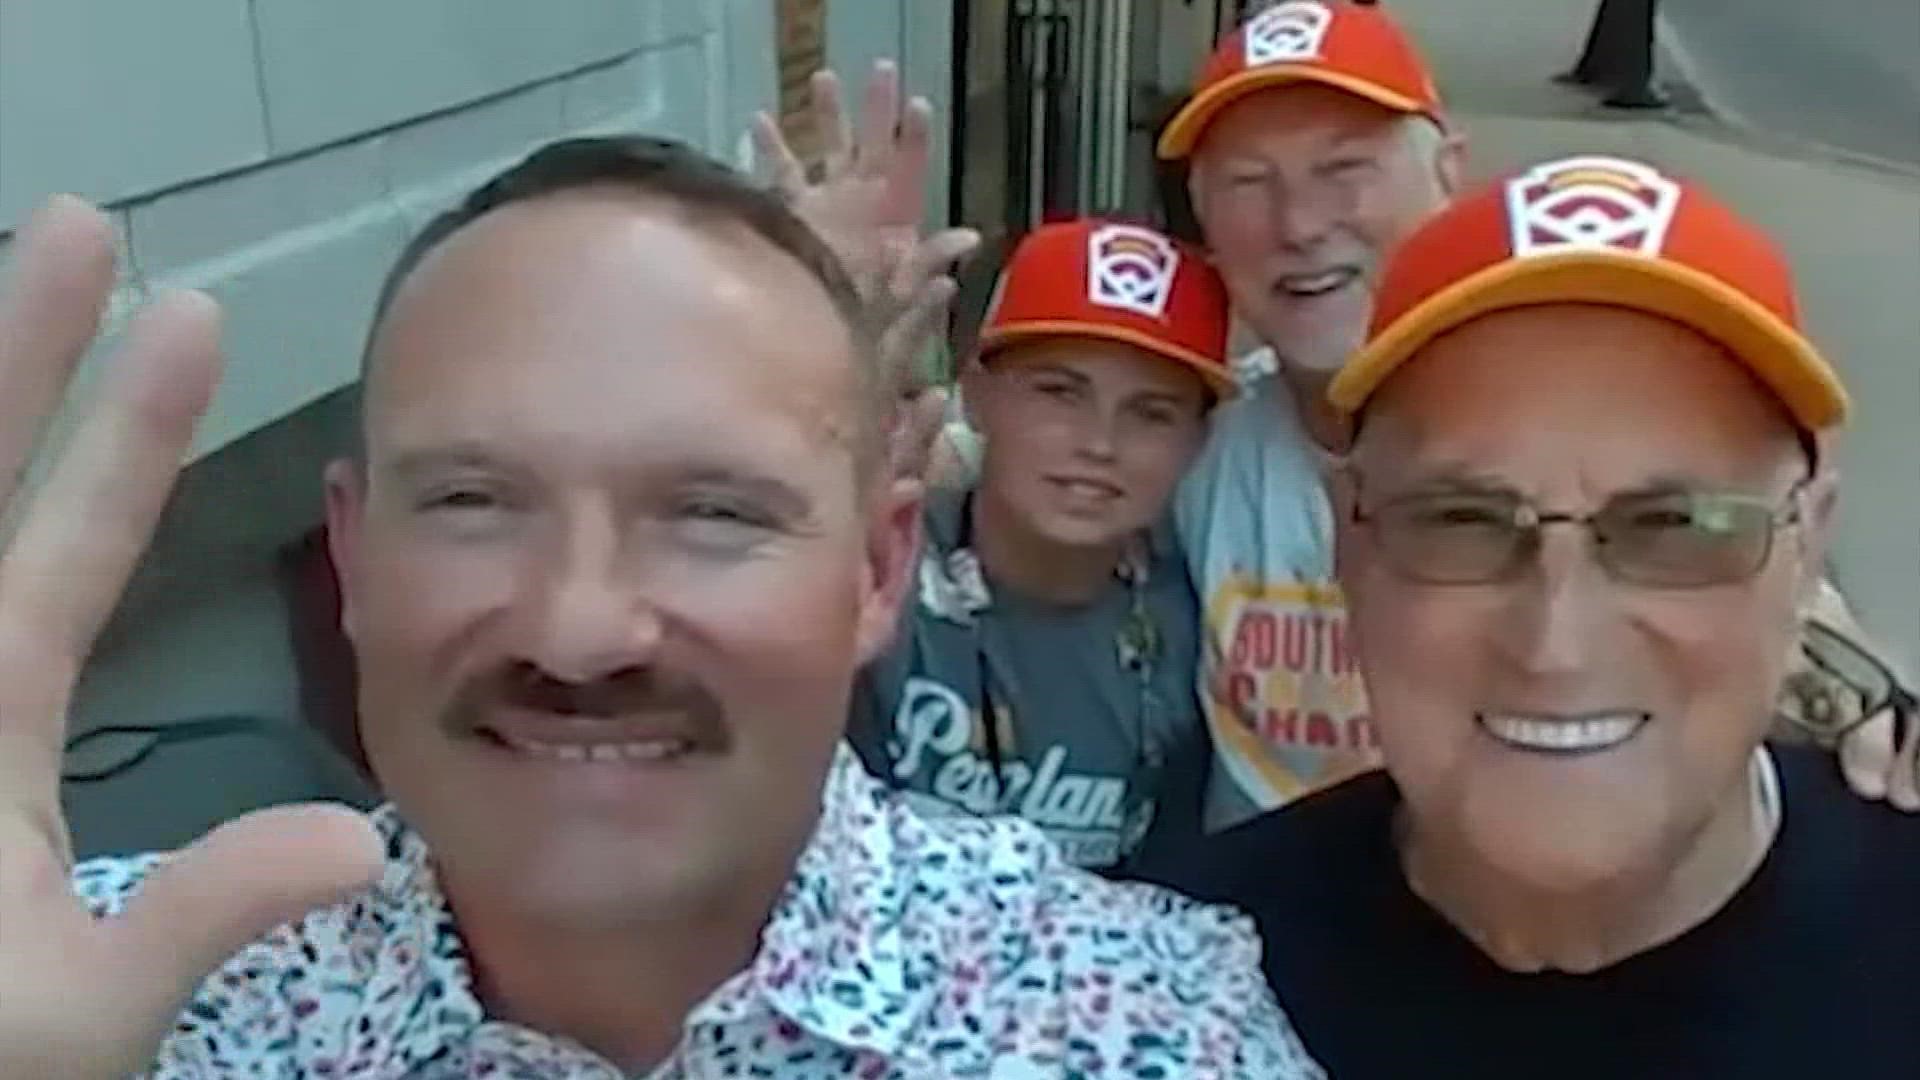 The Richardsons (son, father, grandfather, great-grandfather) are soaking in the fun at the Little League World Series.